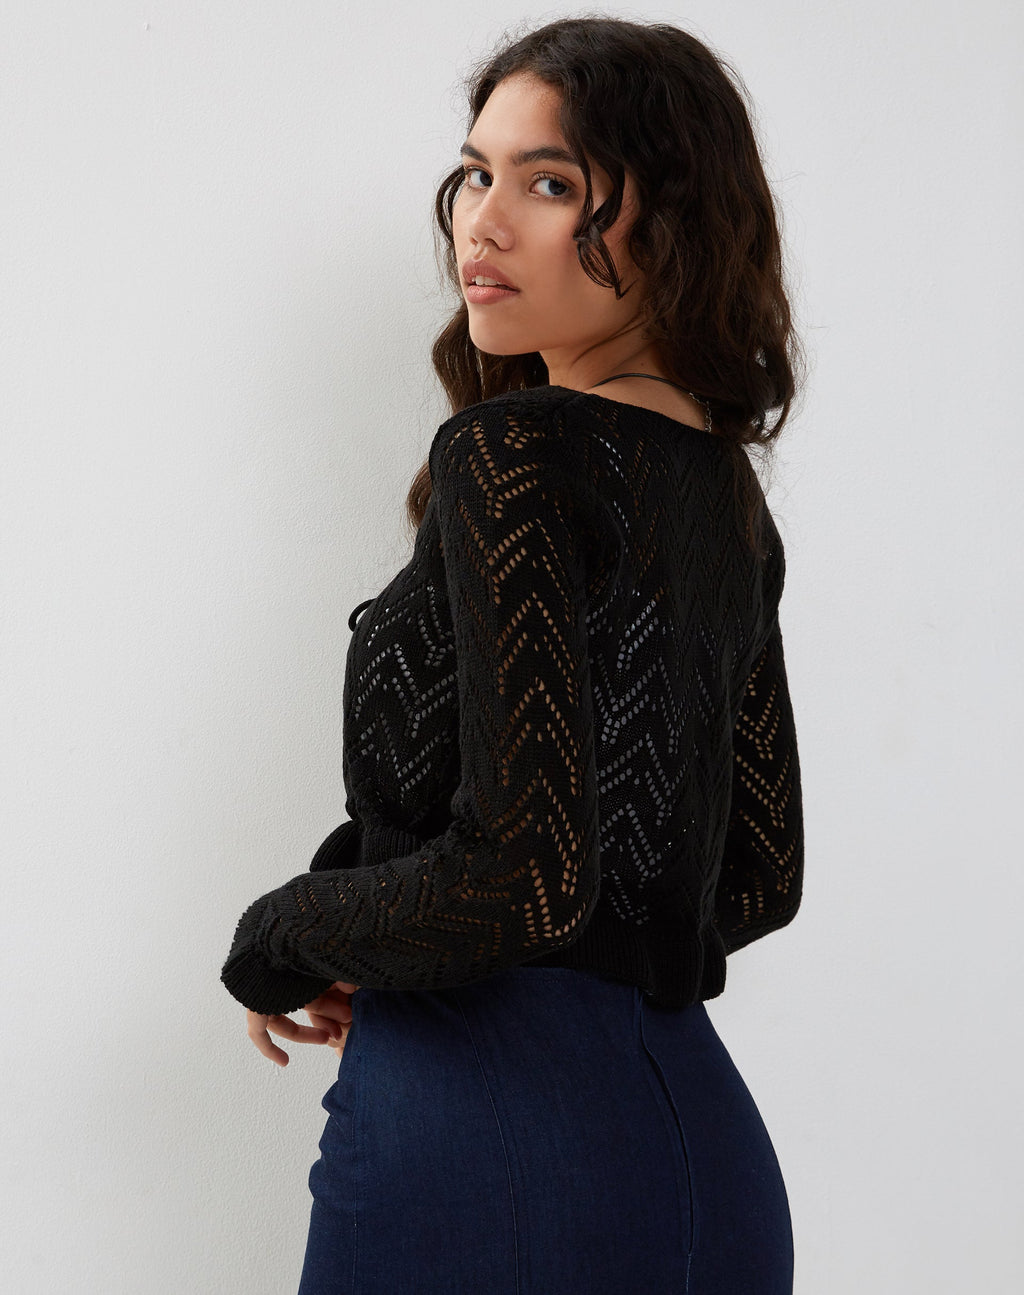 Vella Cardigan in Knitted Black